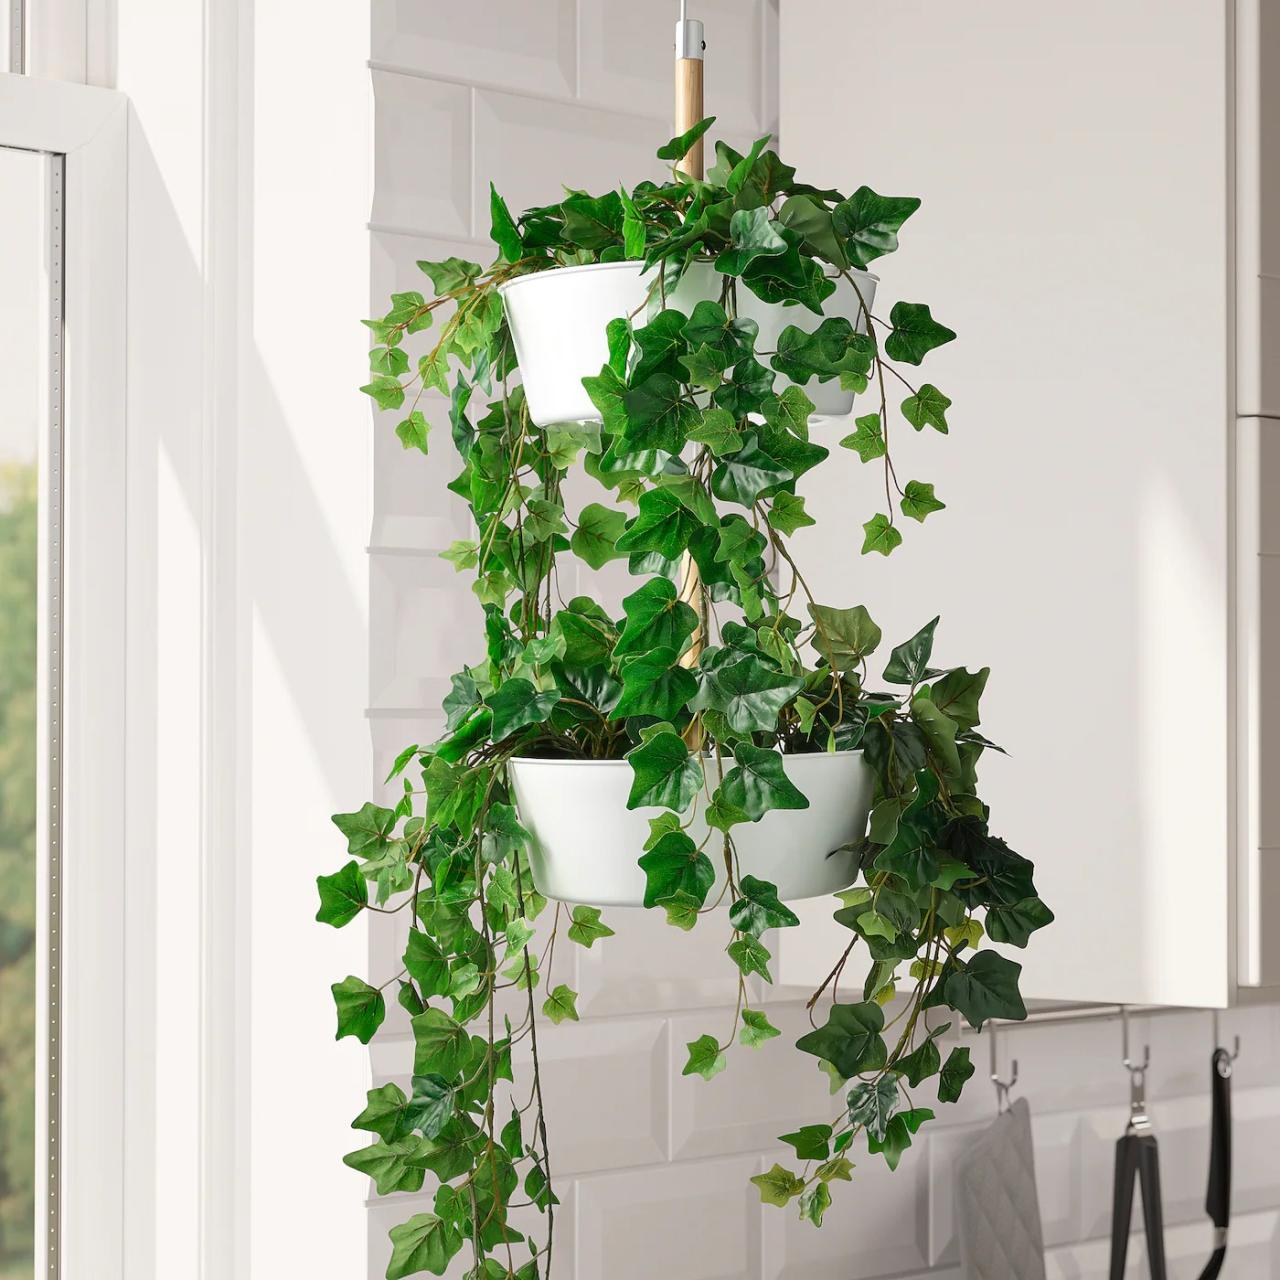 Hanging Plants Indoor | Fake Hanging Plants: A Guide to Indoor Decorating with Artificial Greenery